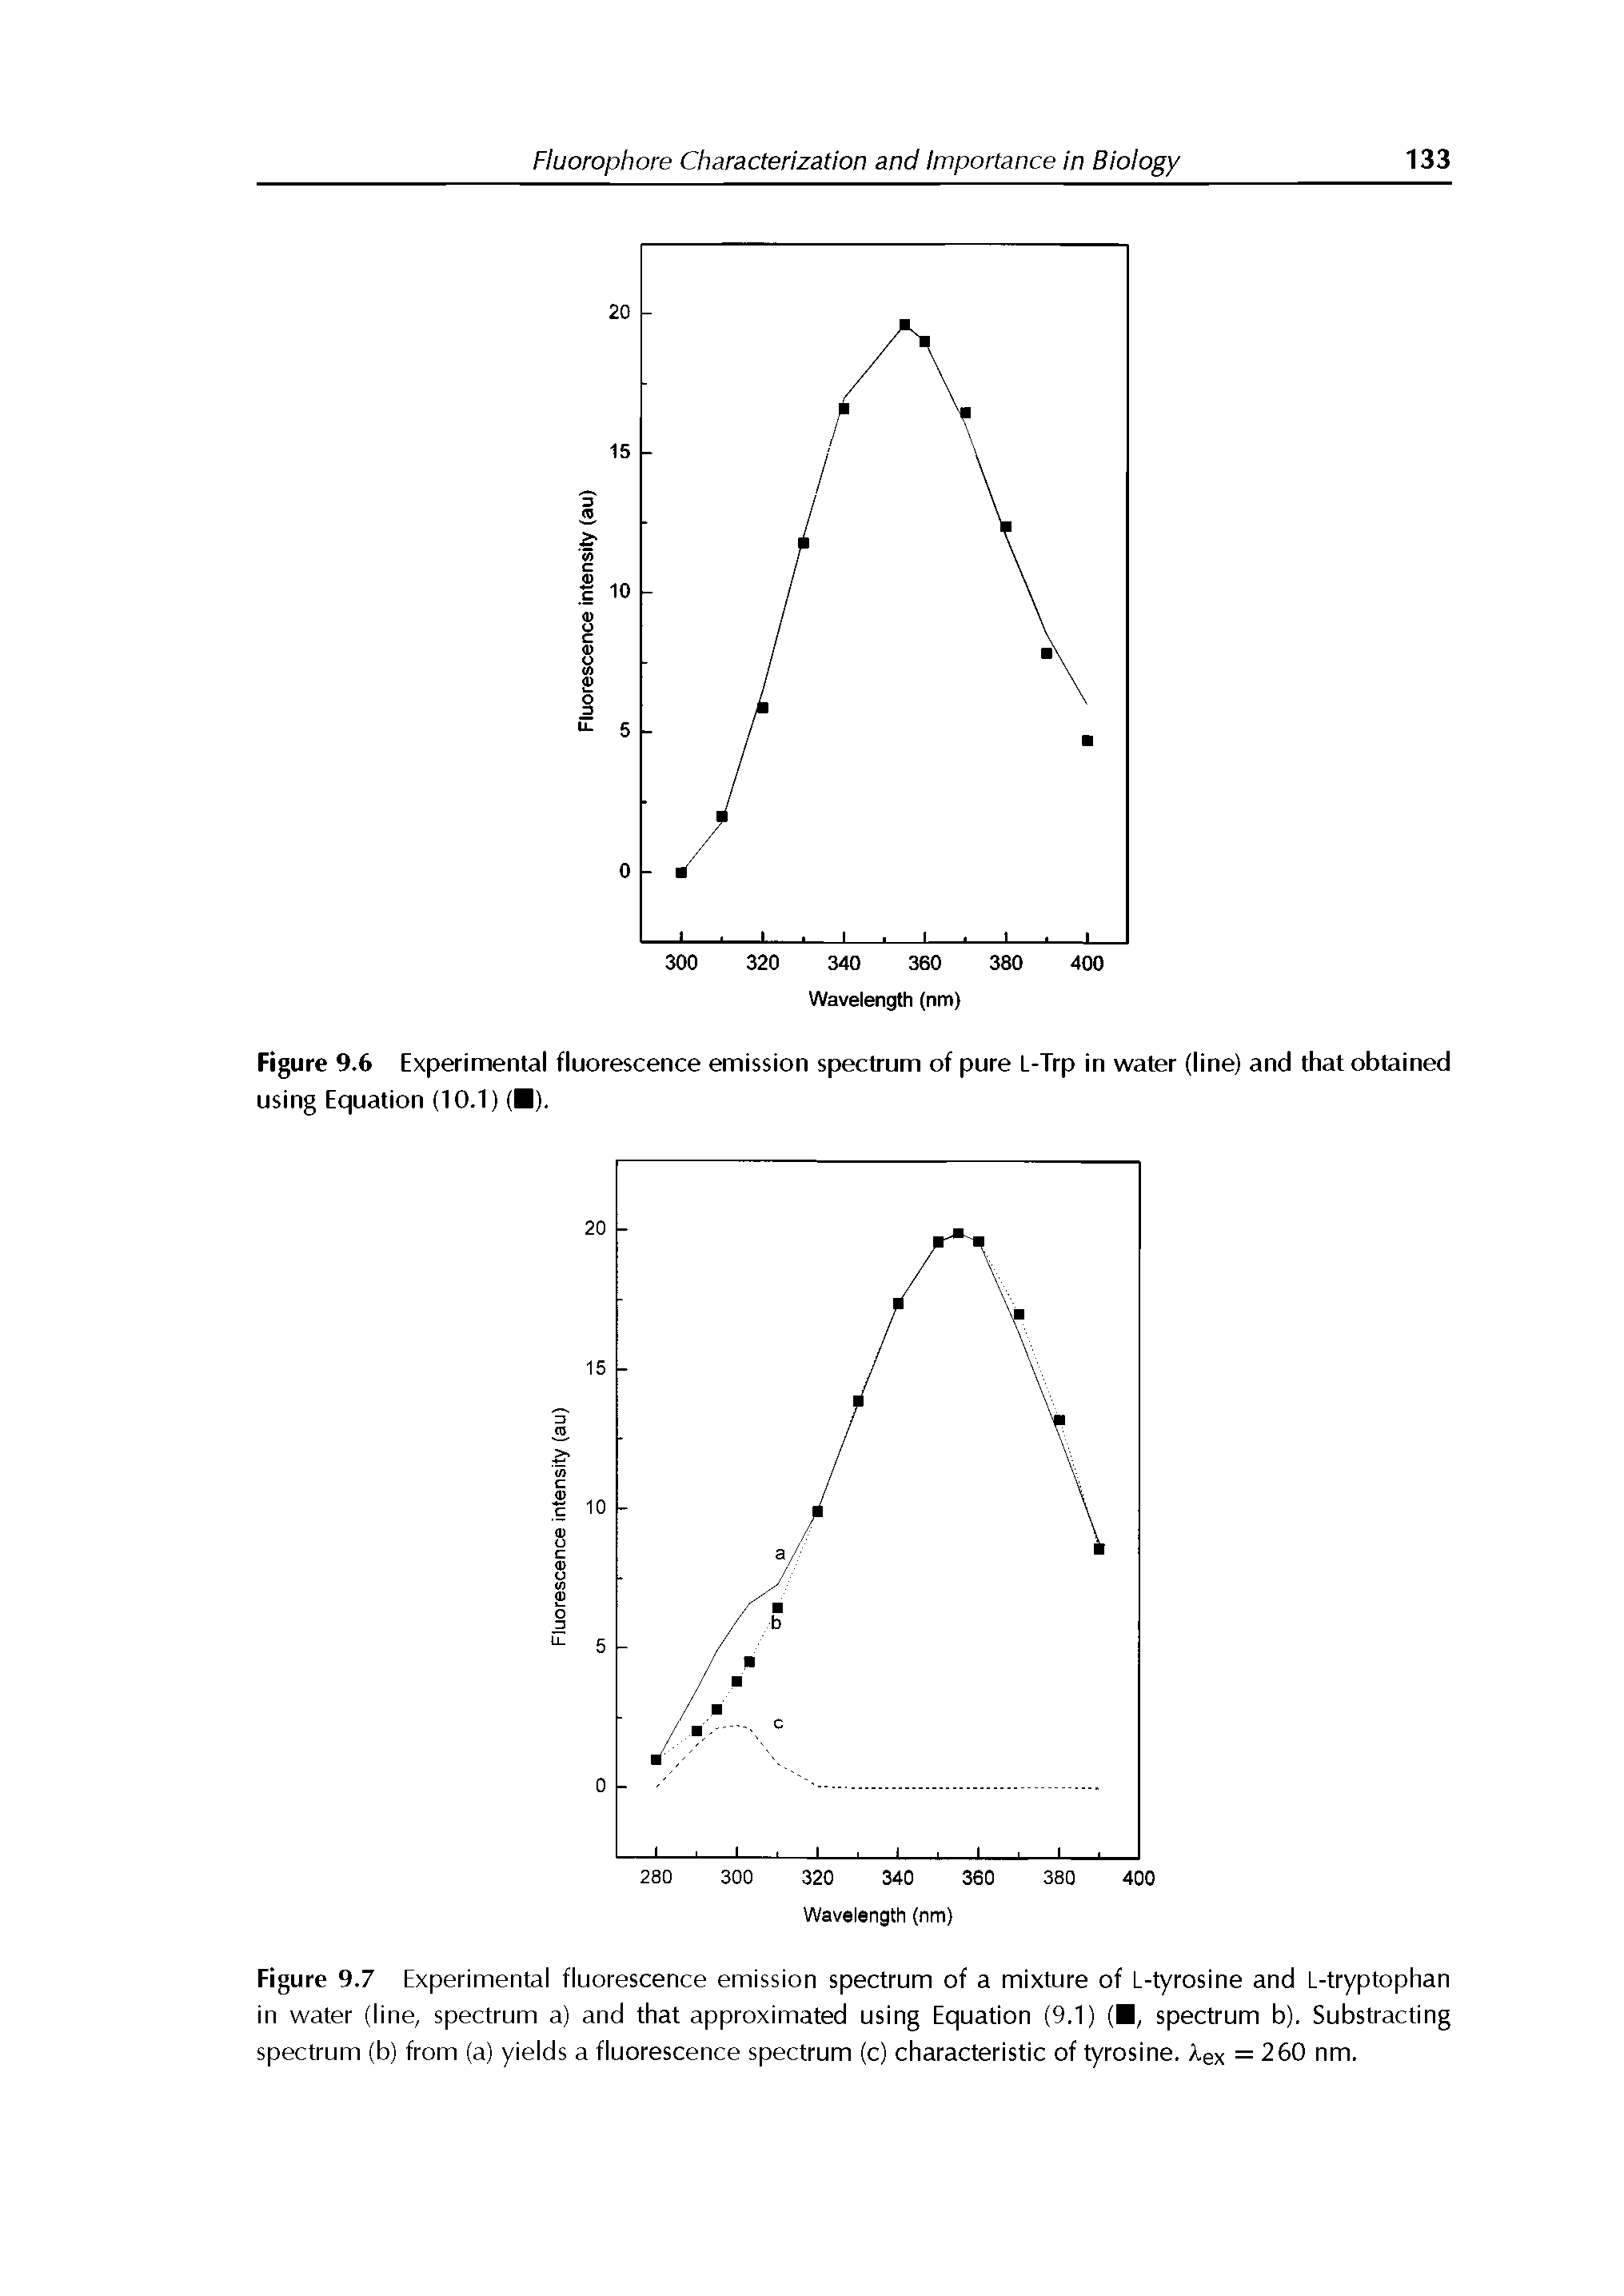 Figure 9.7 Experimental fluorescence emission spectrum of a mixture of L-tyrosine and L-tryptophan in water (line, spectrum a) and that approximated using Equation (9.1) ( , spectrum b). Substracting spectrum (b) from (a) yields a fluorescence spectrum (c) characteristic of tyrosine. Xex =260 nm.